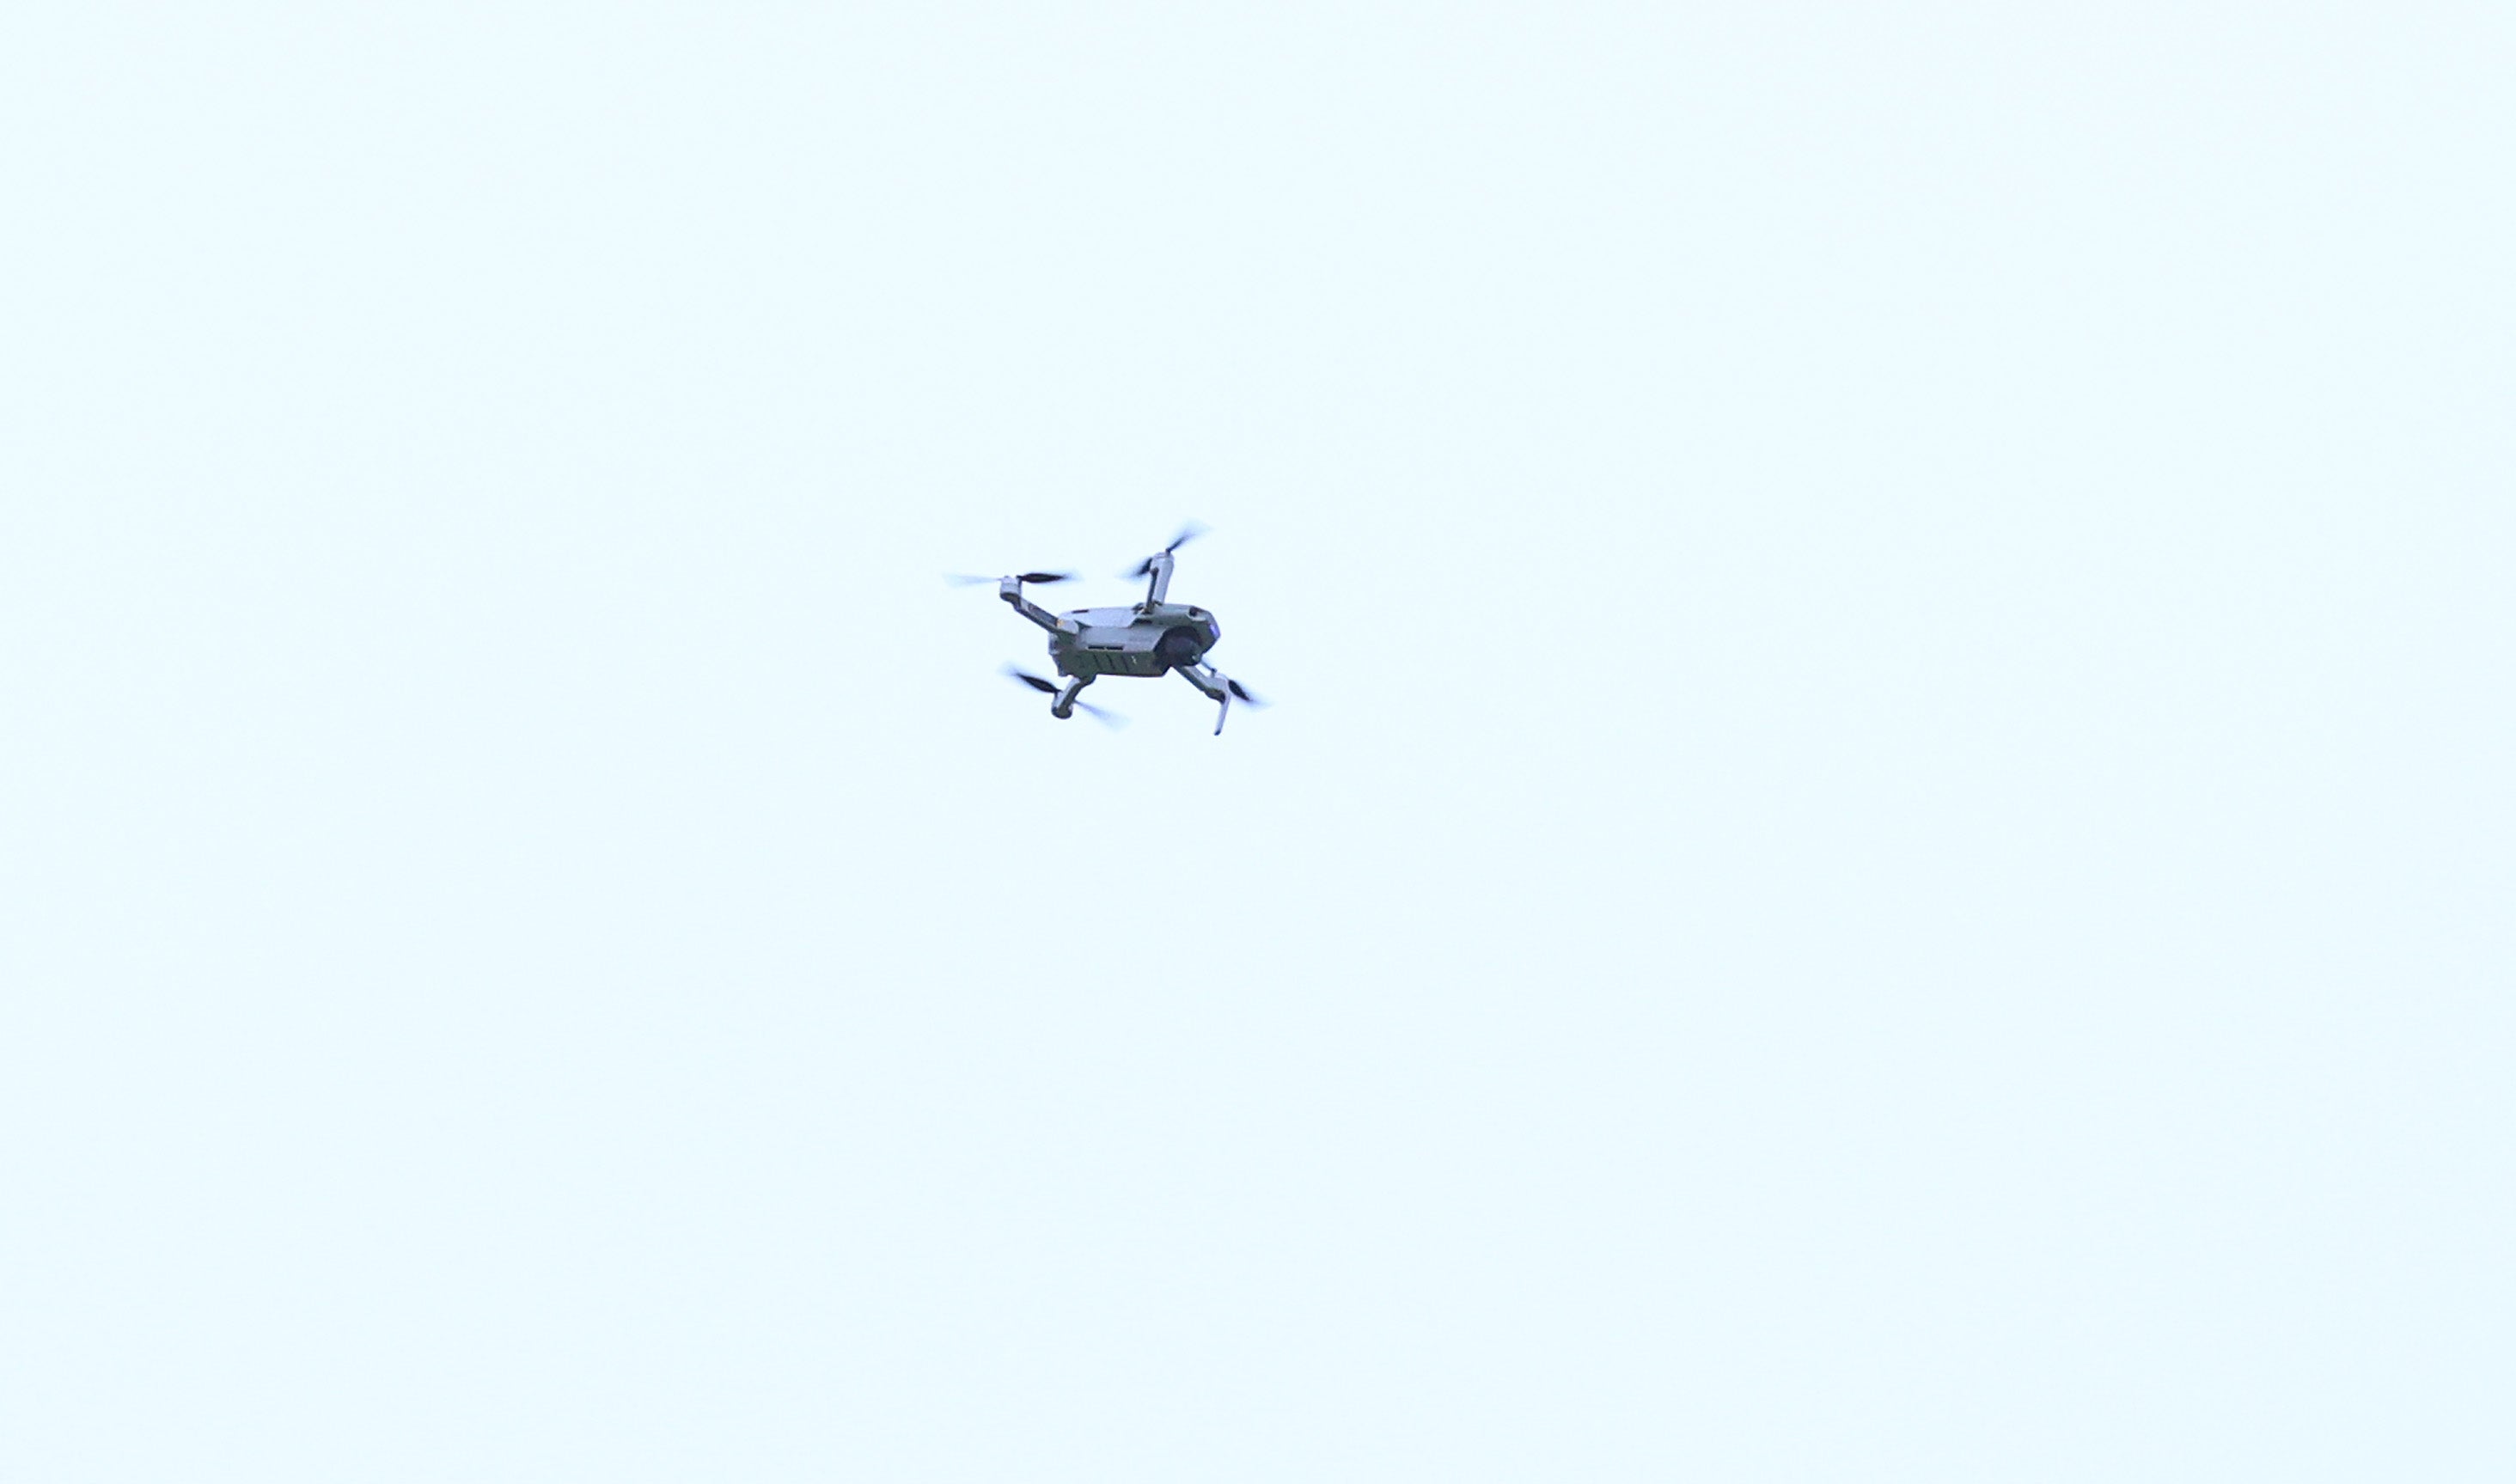 A done is seen flying over the Brentford Community Stadium